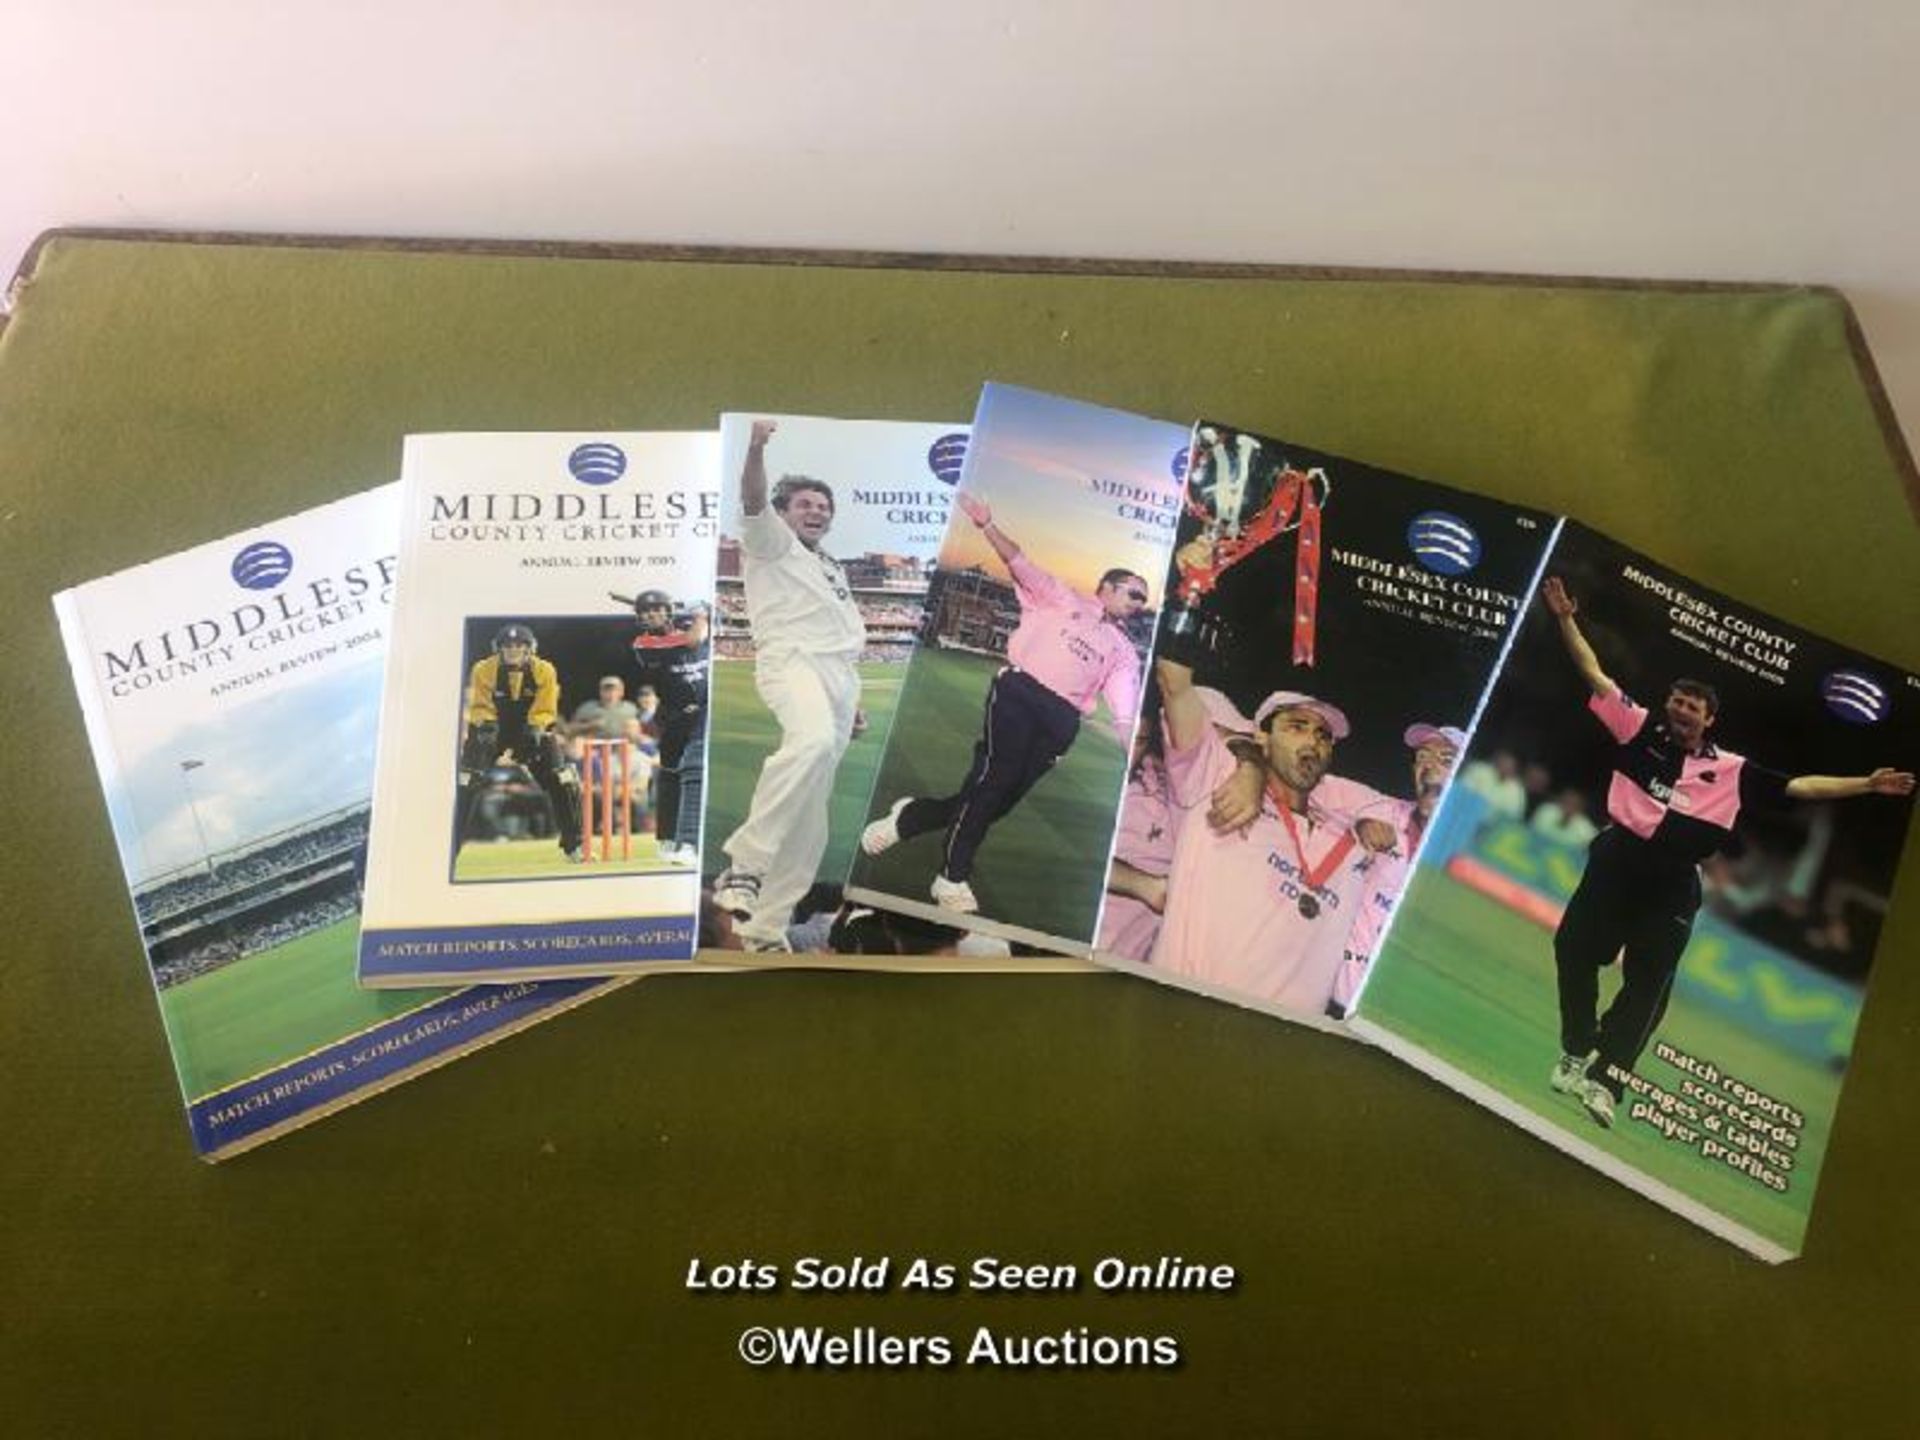 COLLECTION OF MIDDLESEX COUNTY CRICKET CLUB ANNUAL REVIEW BOOKS - 1992/93 AND 2004 TO 2013